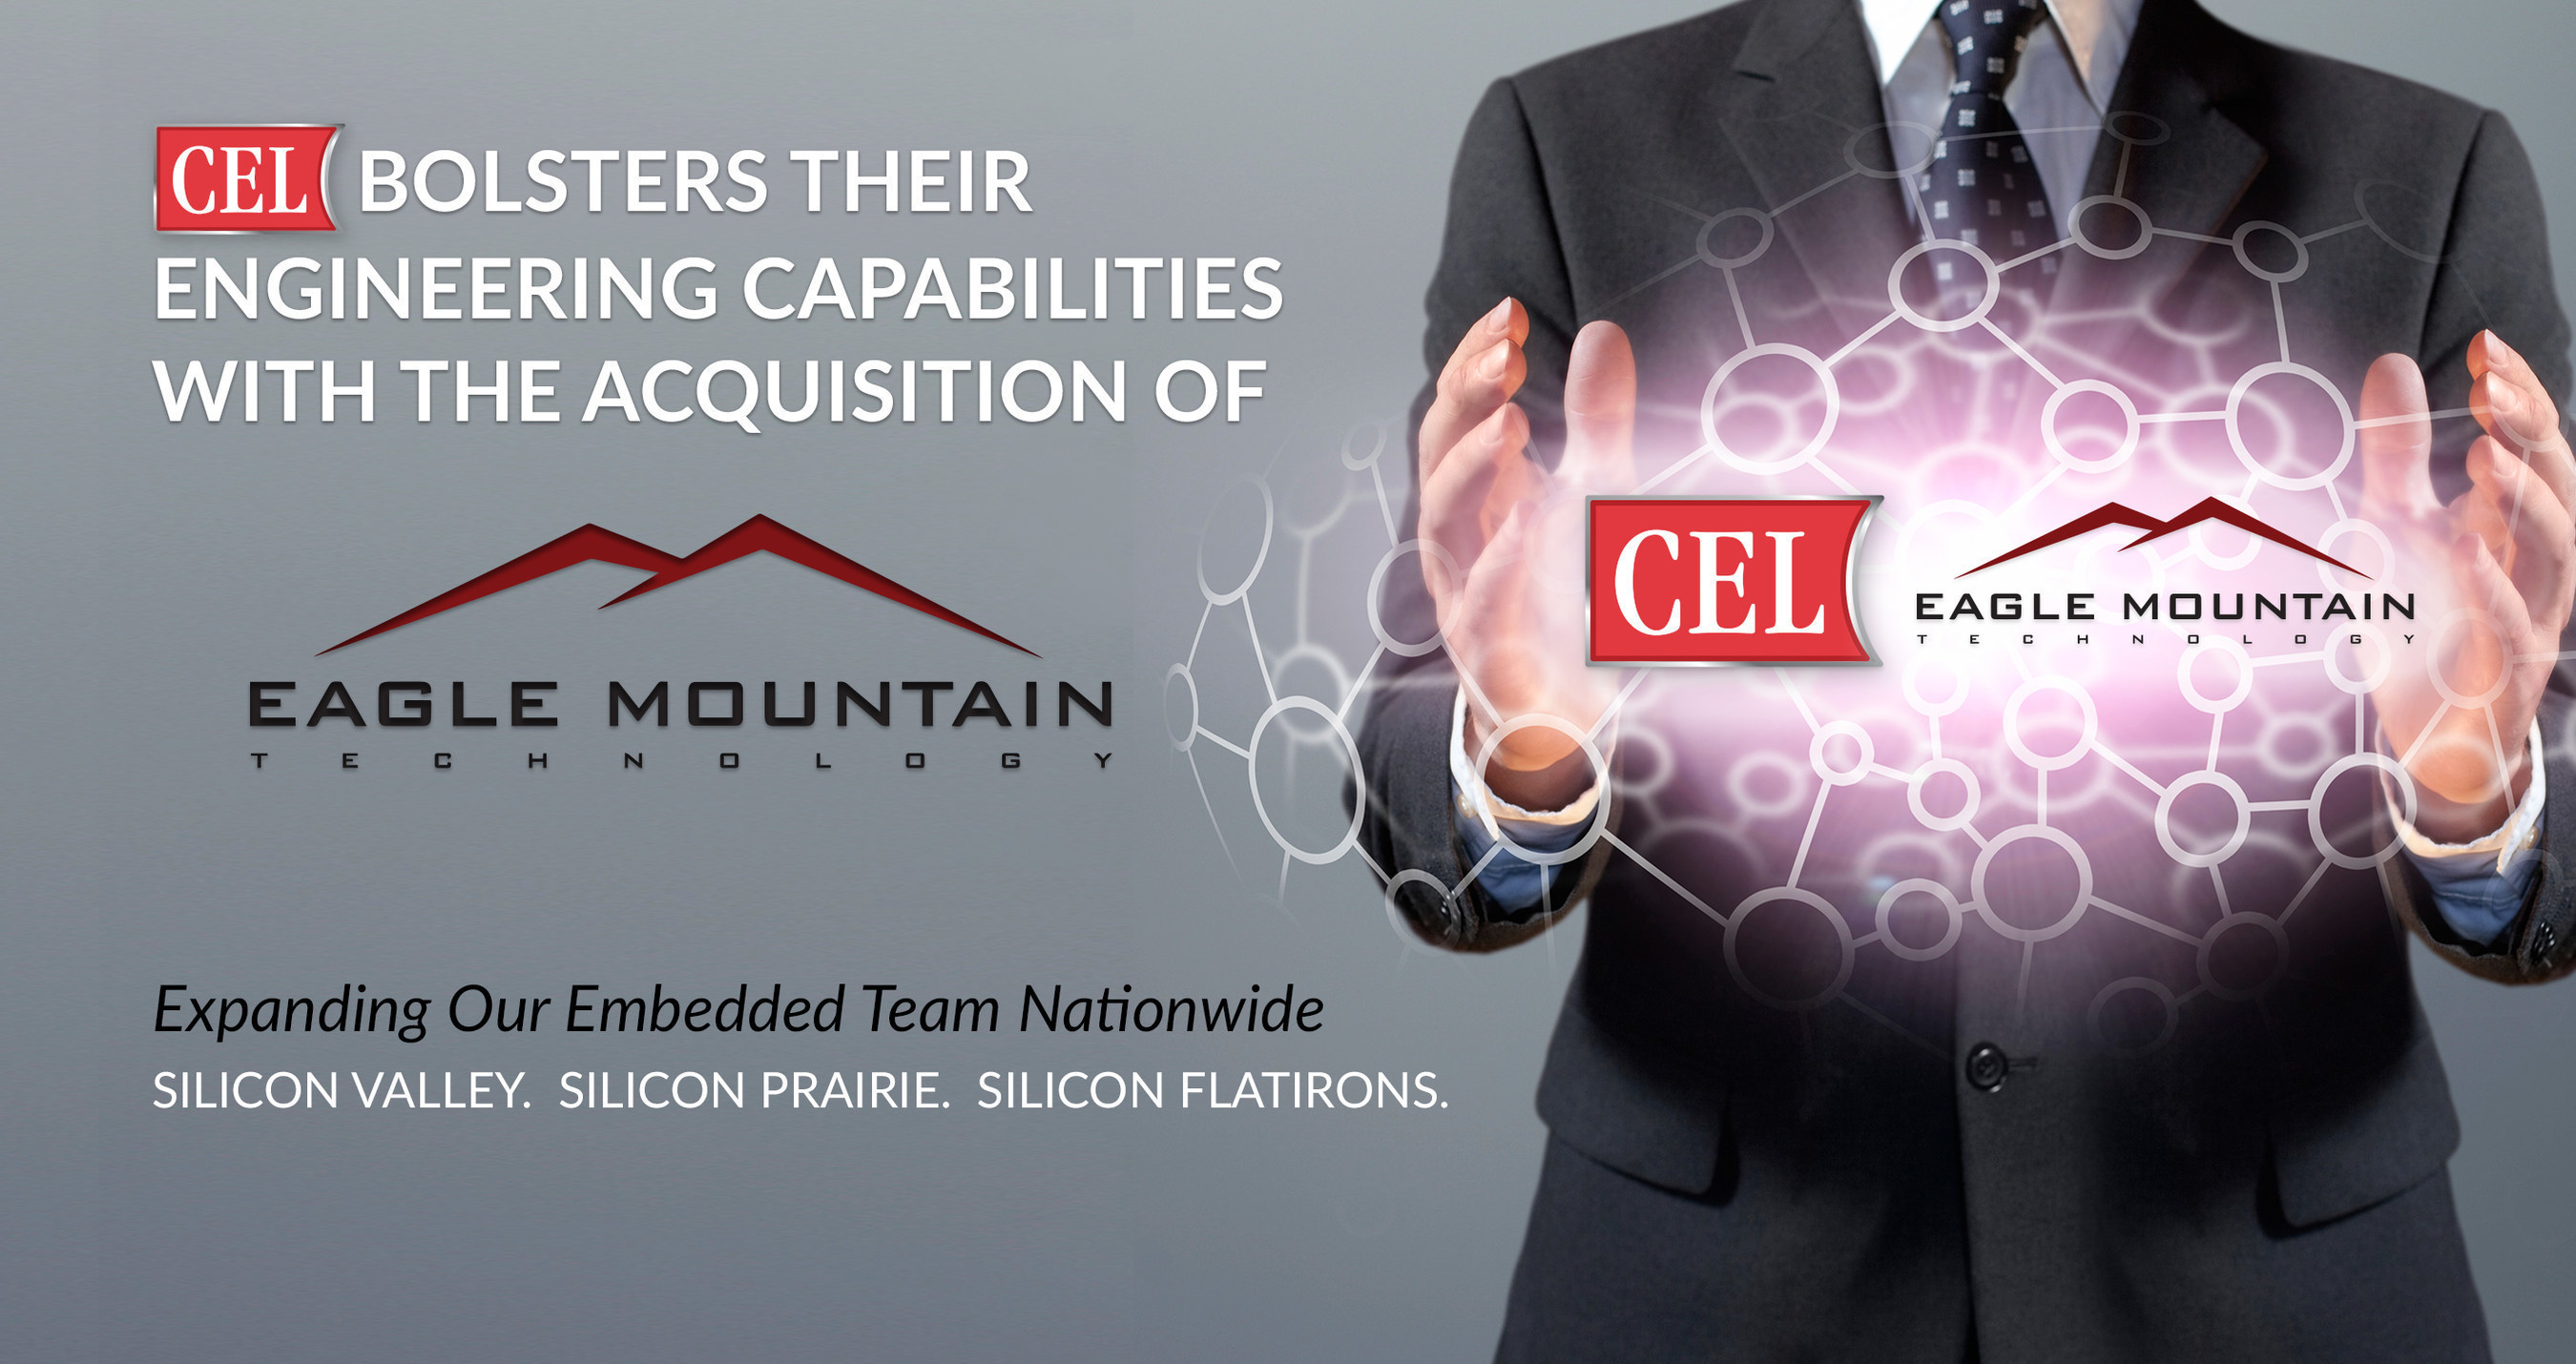 CEL Expands Engineering Team Through the Acquisition of Eagle Mountain Technology